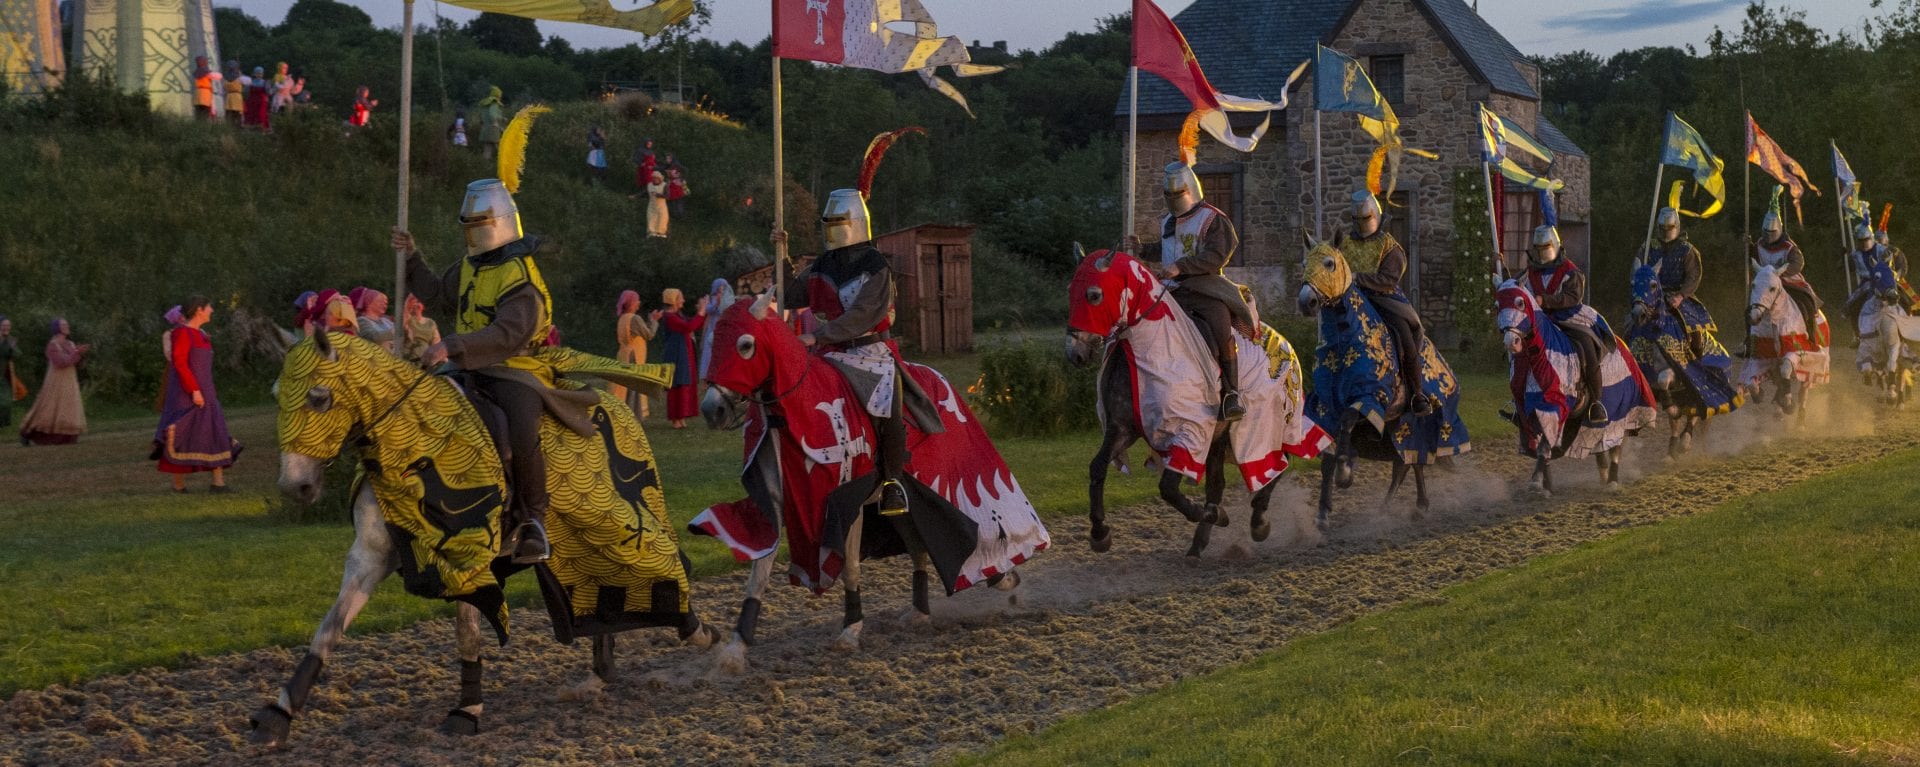 13-facts-about-kynren-an-epic-tale-of-england